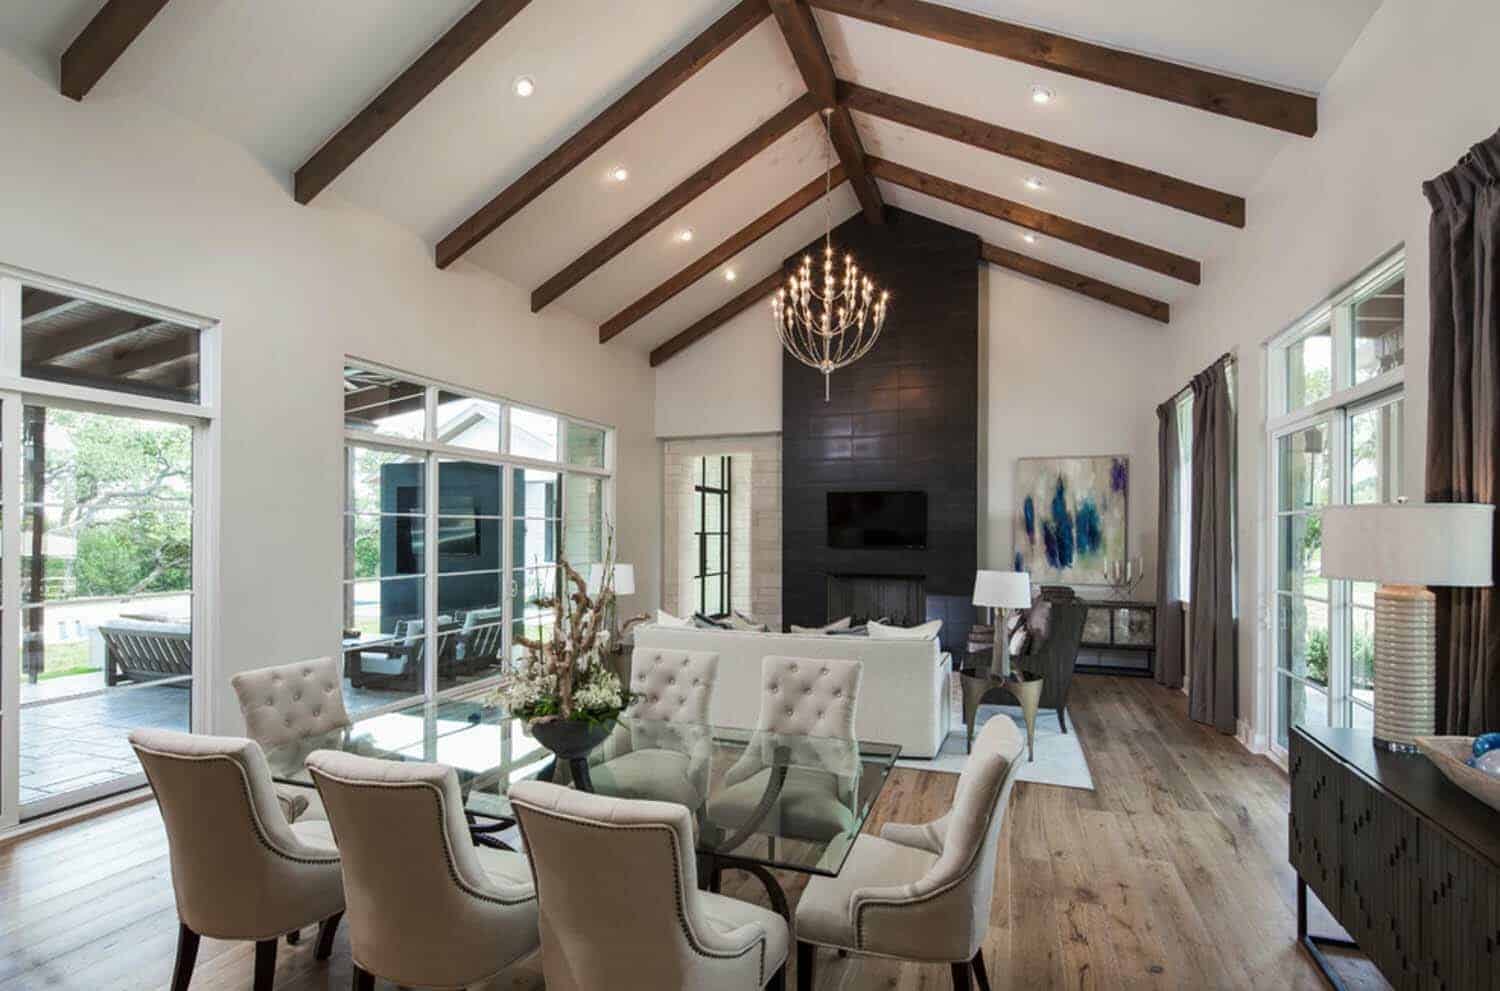 Step into this beautiful Lake Travis home with bright and airy living spaces